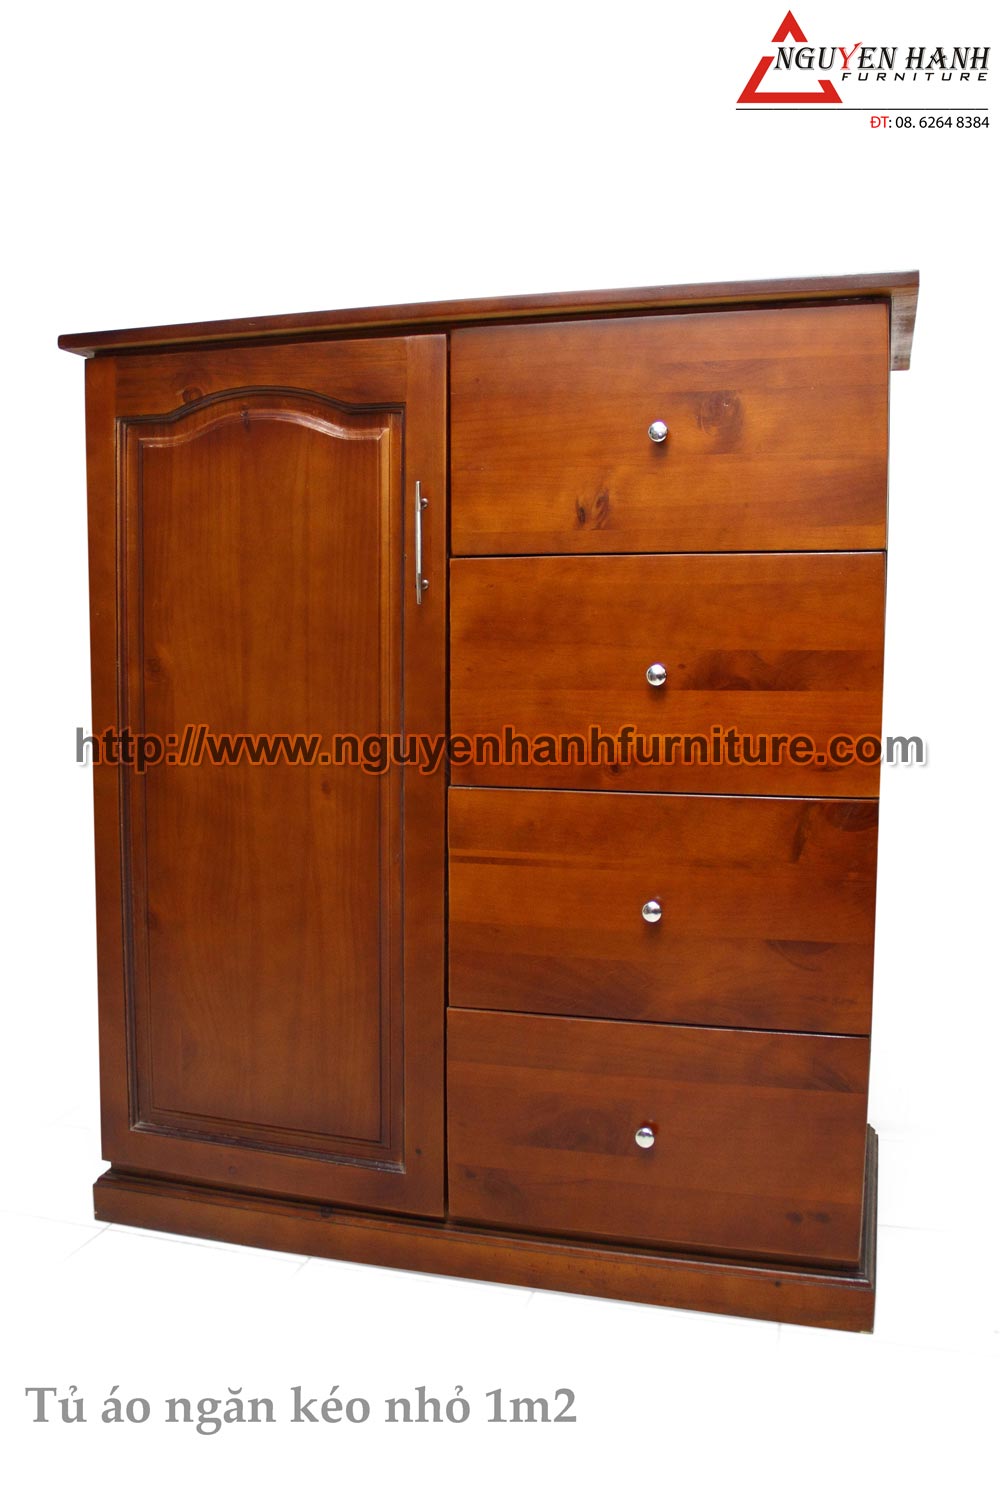 Name product: 1m2 Drawers Cabinet